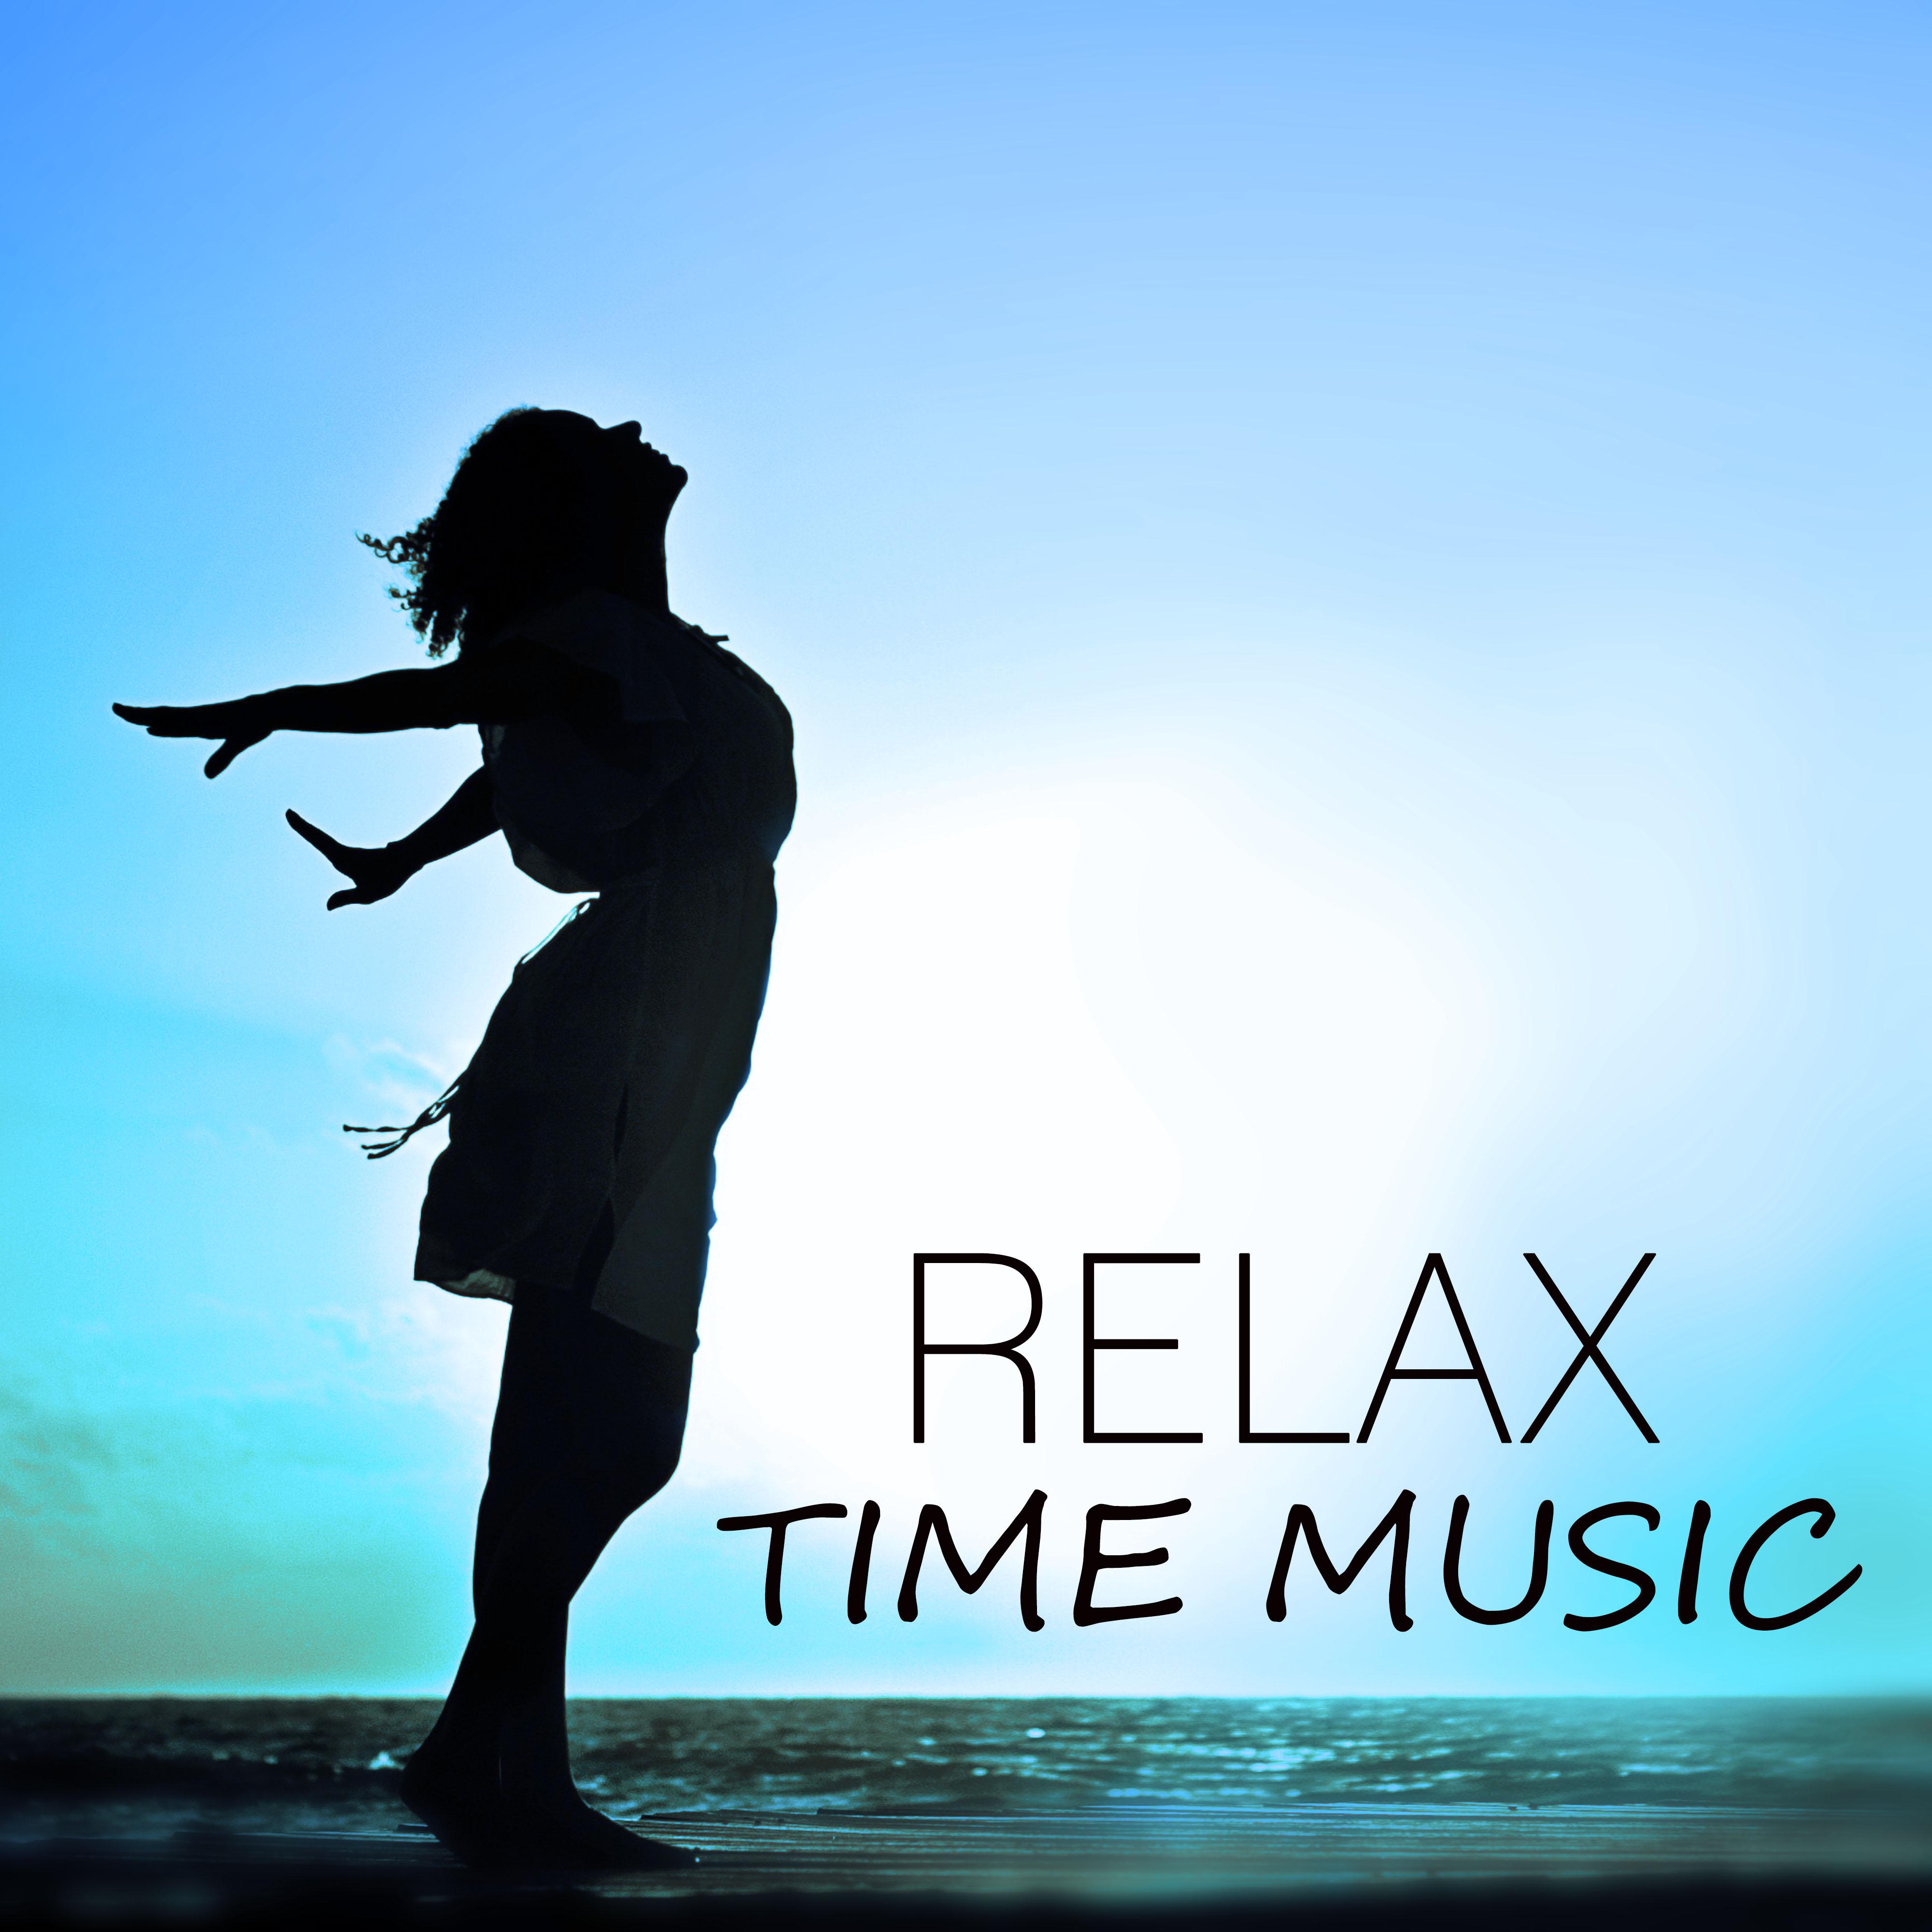 Relax Time Music  New Age Music for Rest, Contemplation, Practise Meditation  Yoga, Asian Zen, Oriental Flute, Well Being